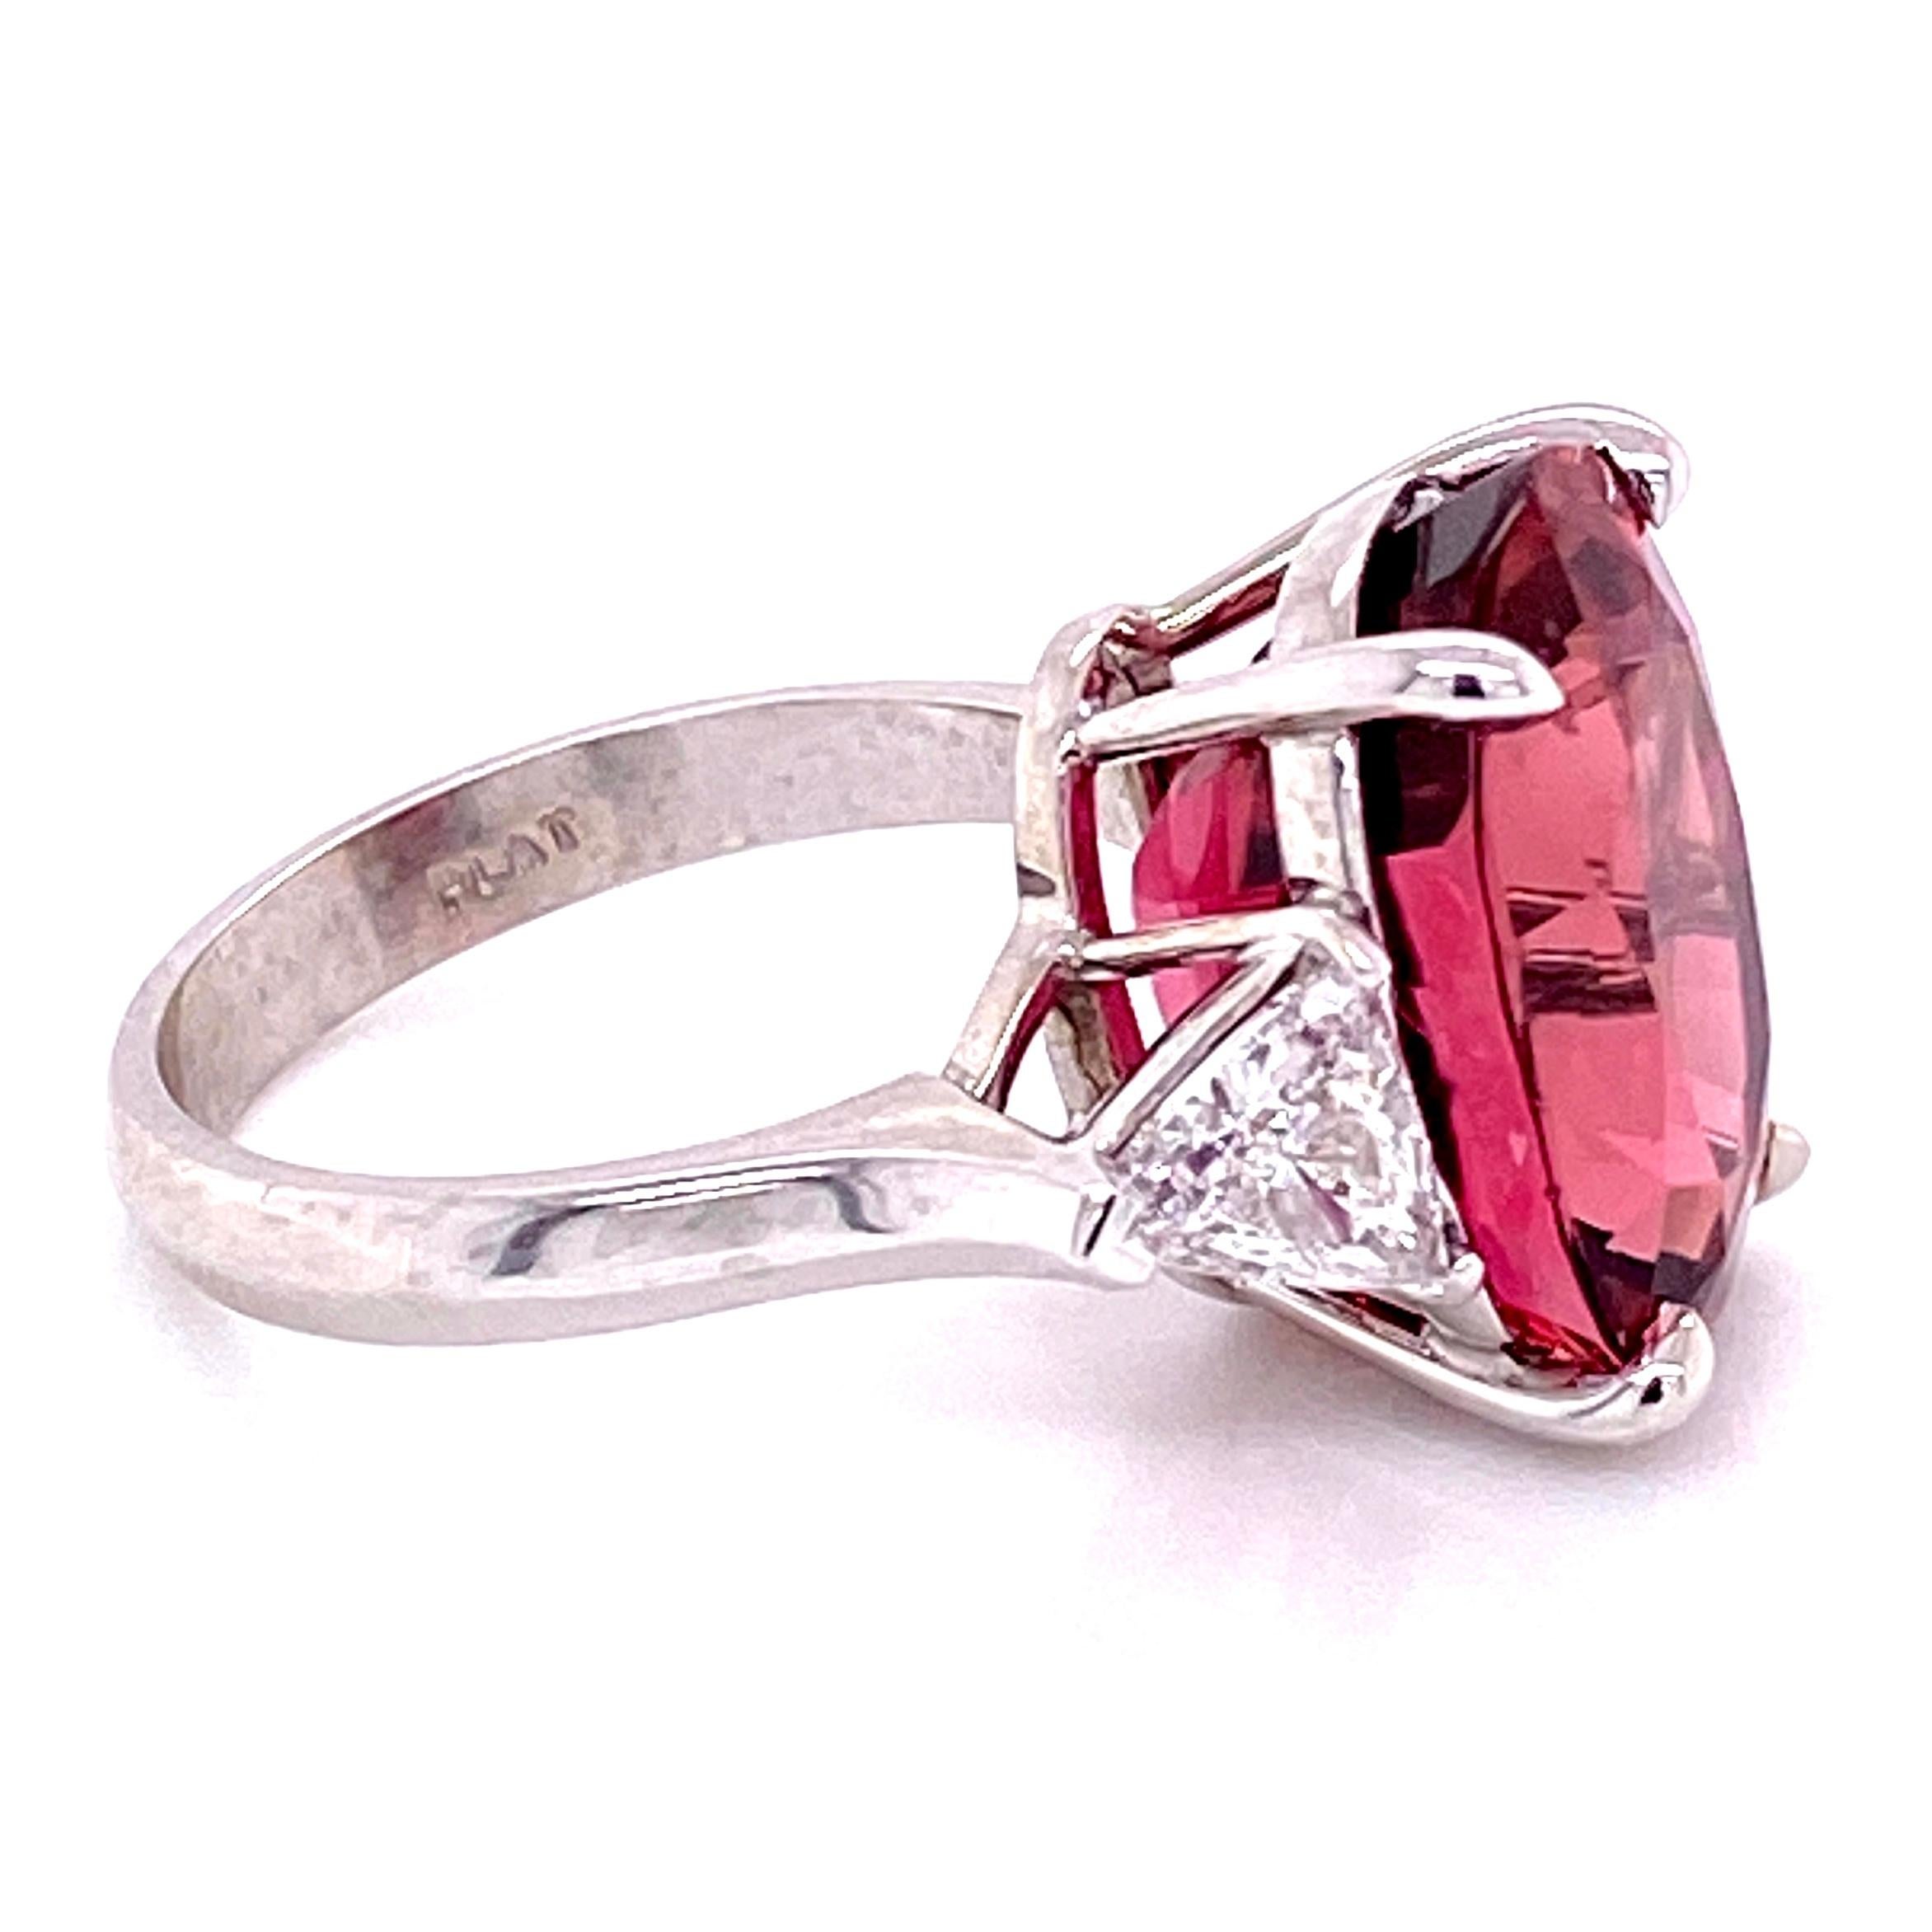 Simply Beautiful! Rubelite Tourmaline and Diamond Cocktail Ring, centering a securely set Oval Rubelite Tourmaline, weighing approx. 11.31 Carat enhanced either side by Trillion Diamonds, approx. 0.98tcw. The ring is Hand crafted in Platinum. Ring